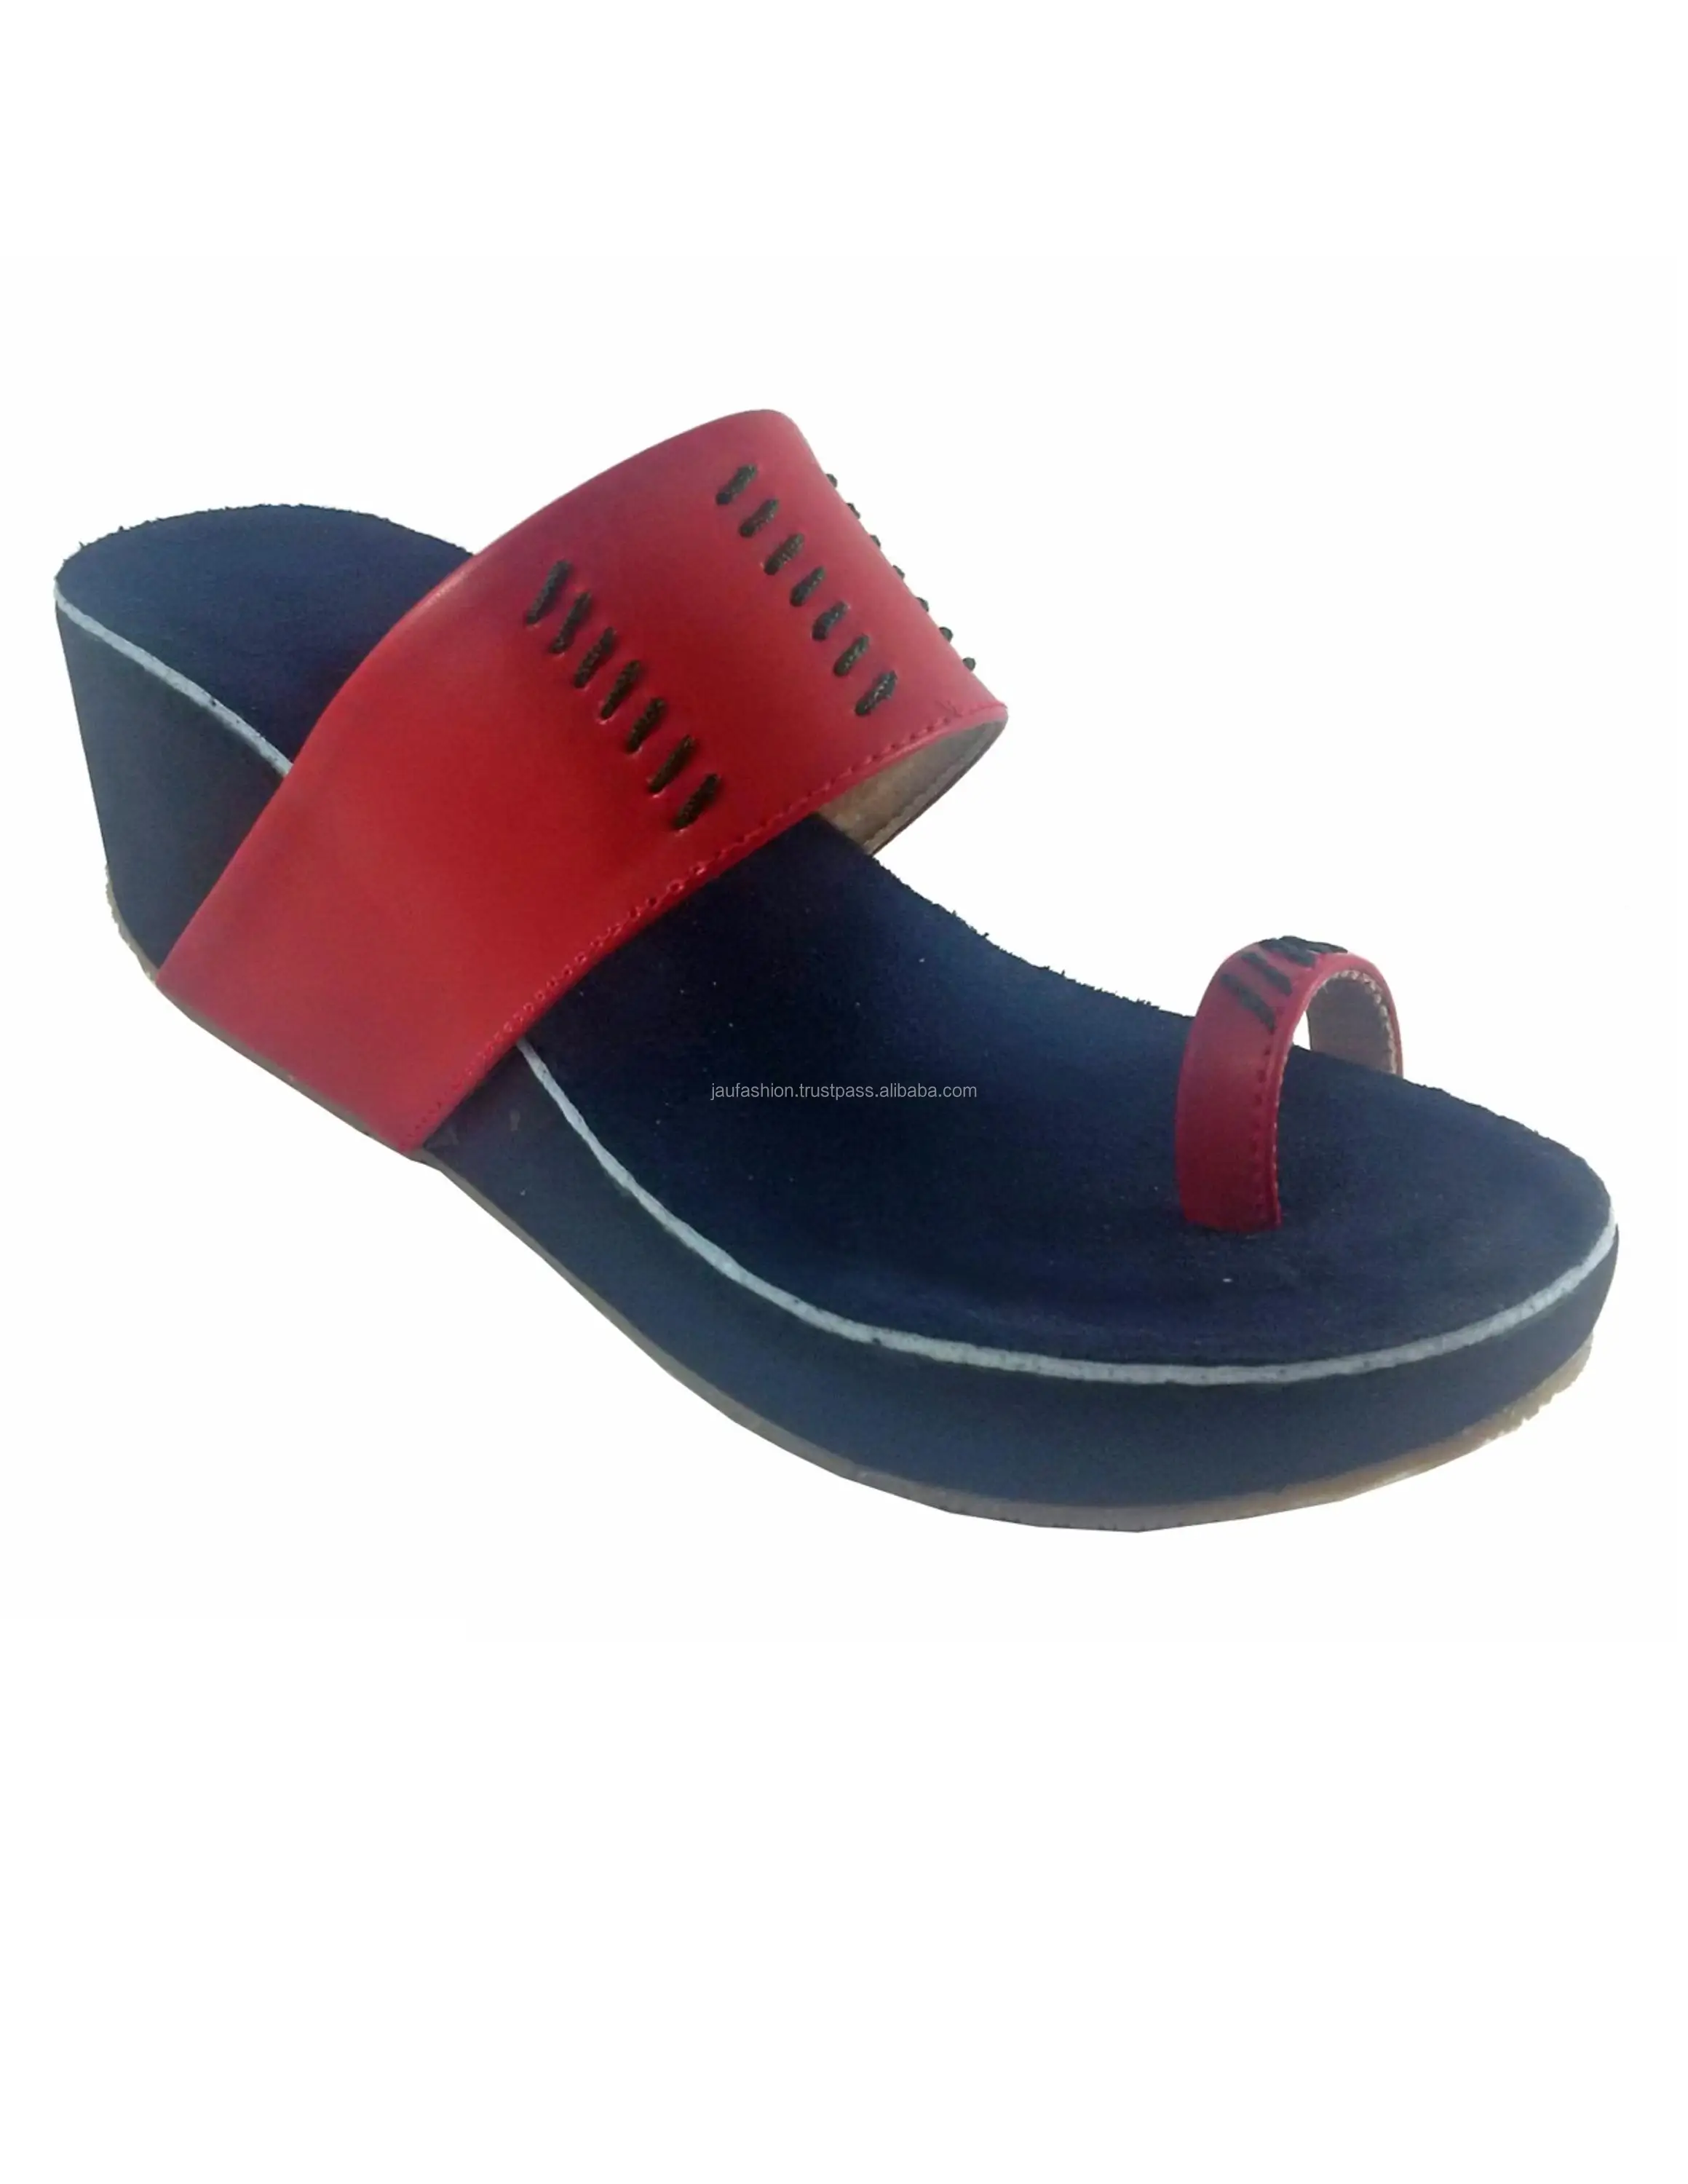 soft slippers for ladies online